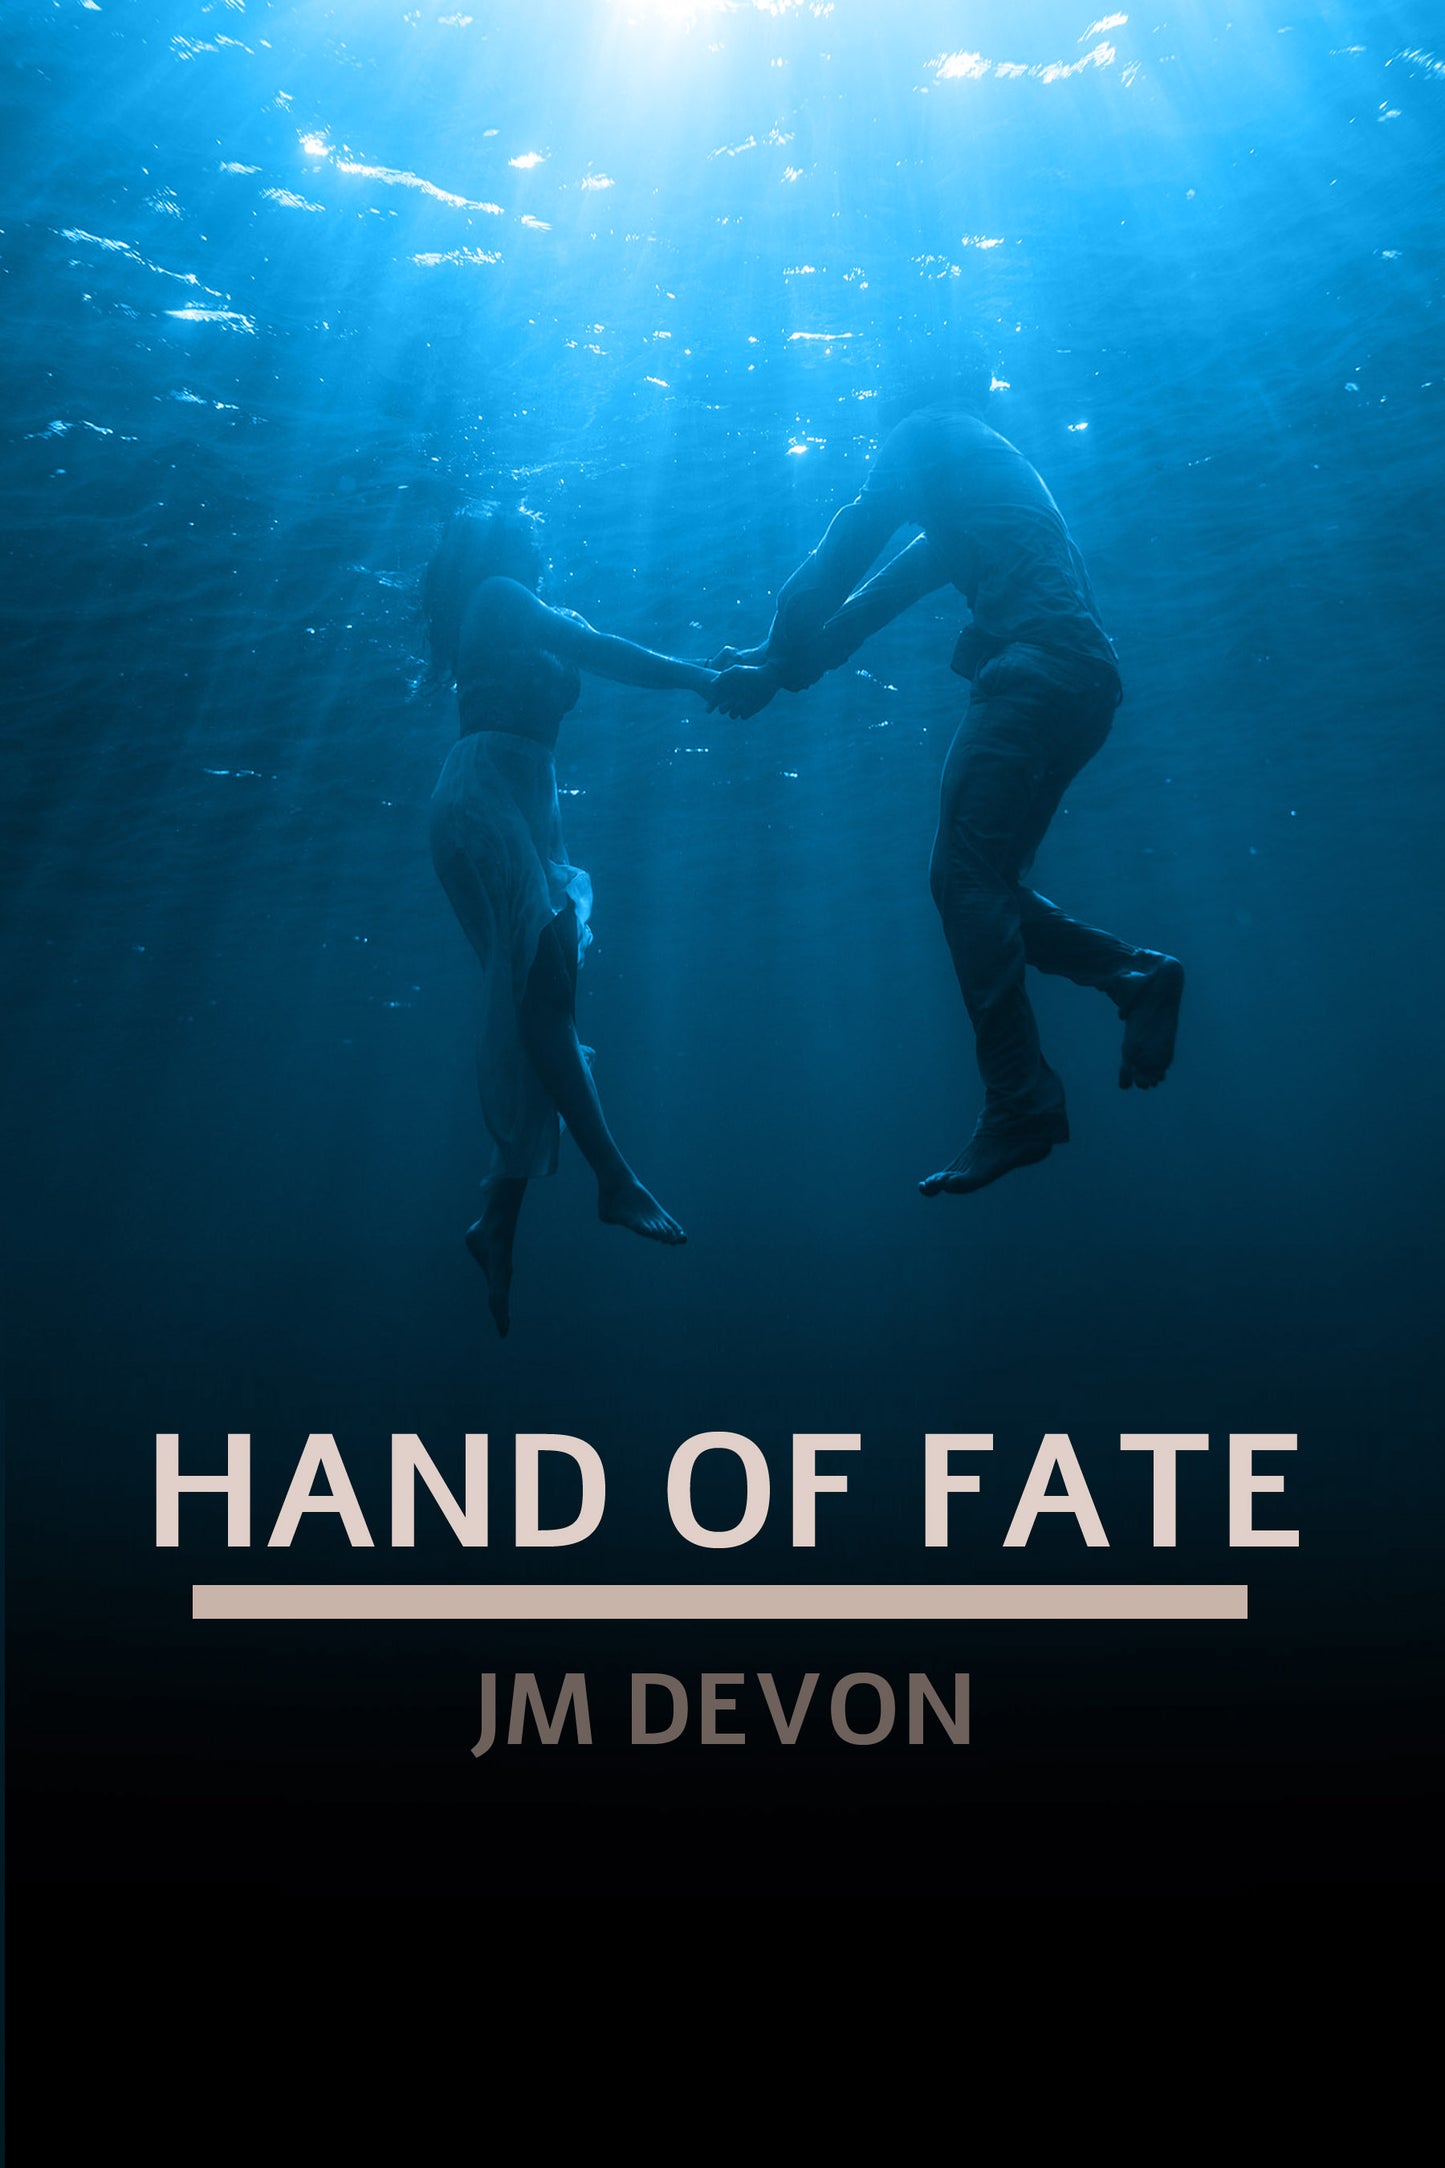 Hand Of Fate | Fated Lovers Volume 1 by JM Devon